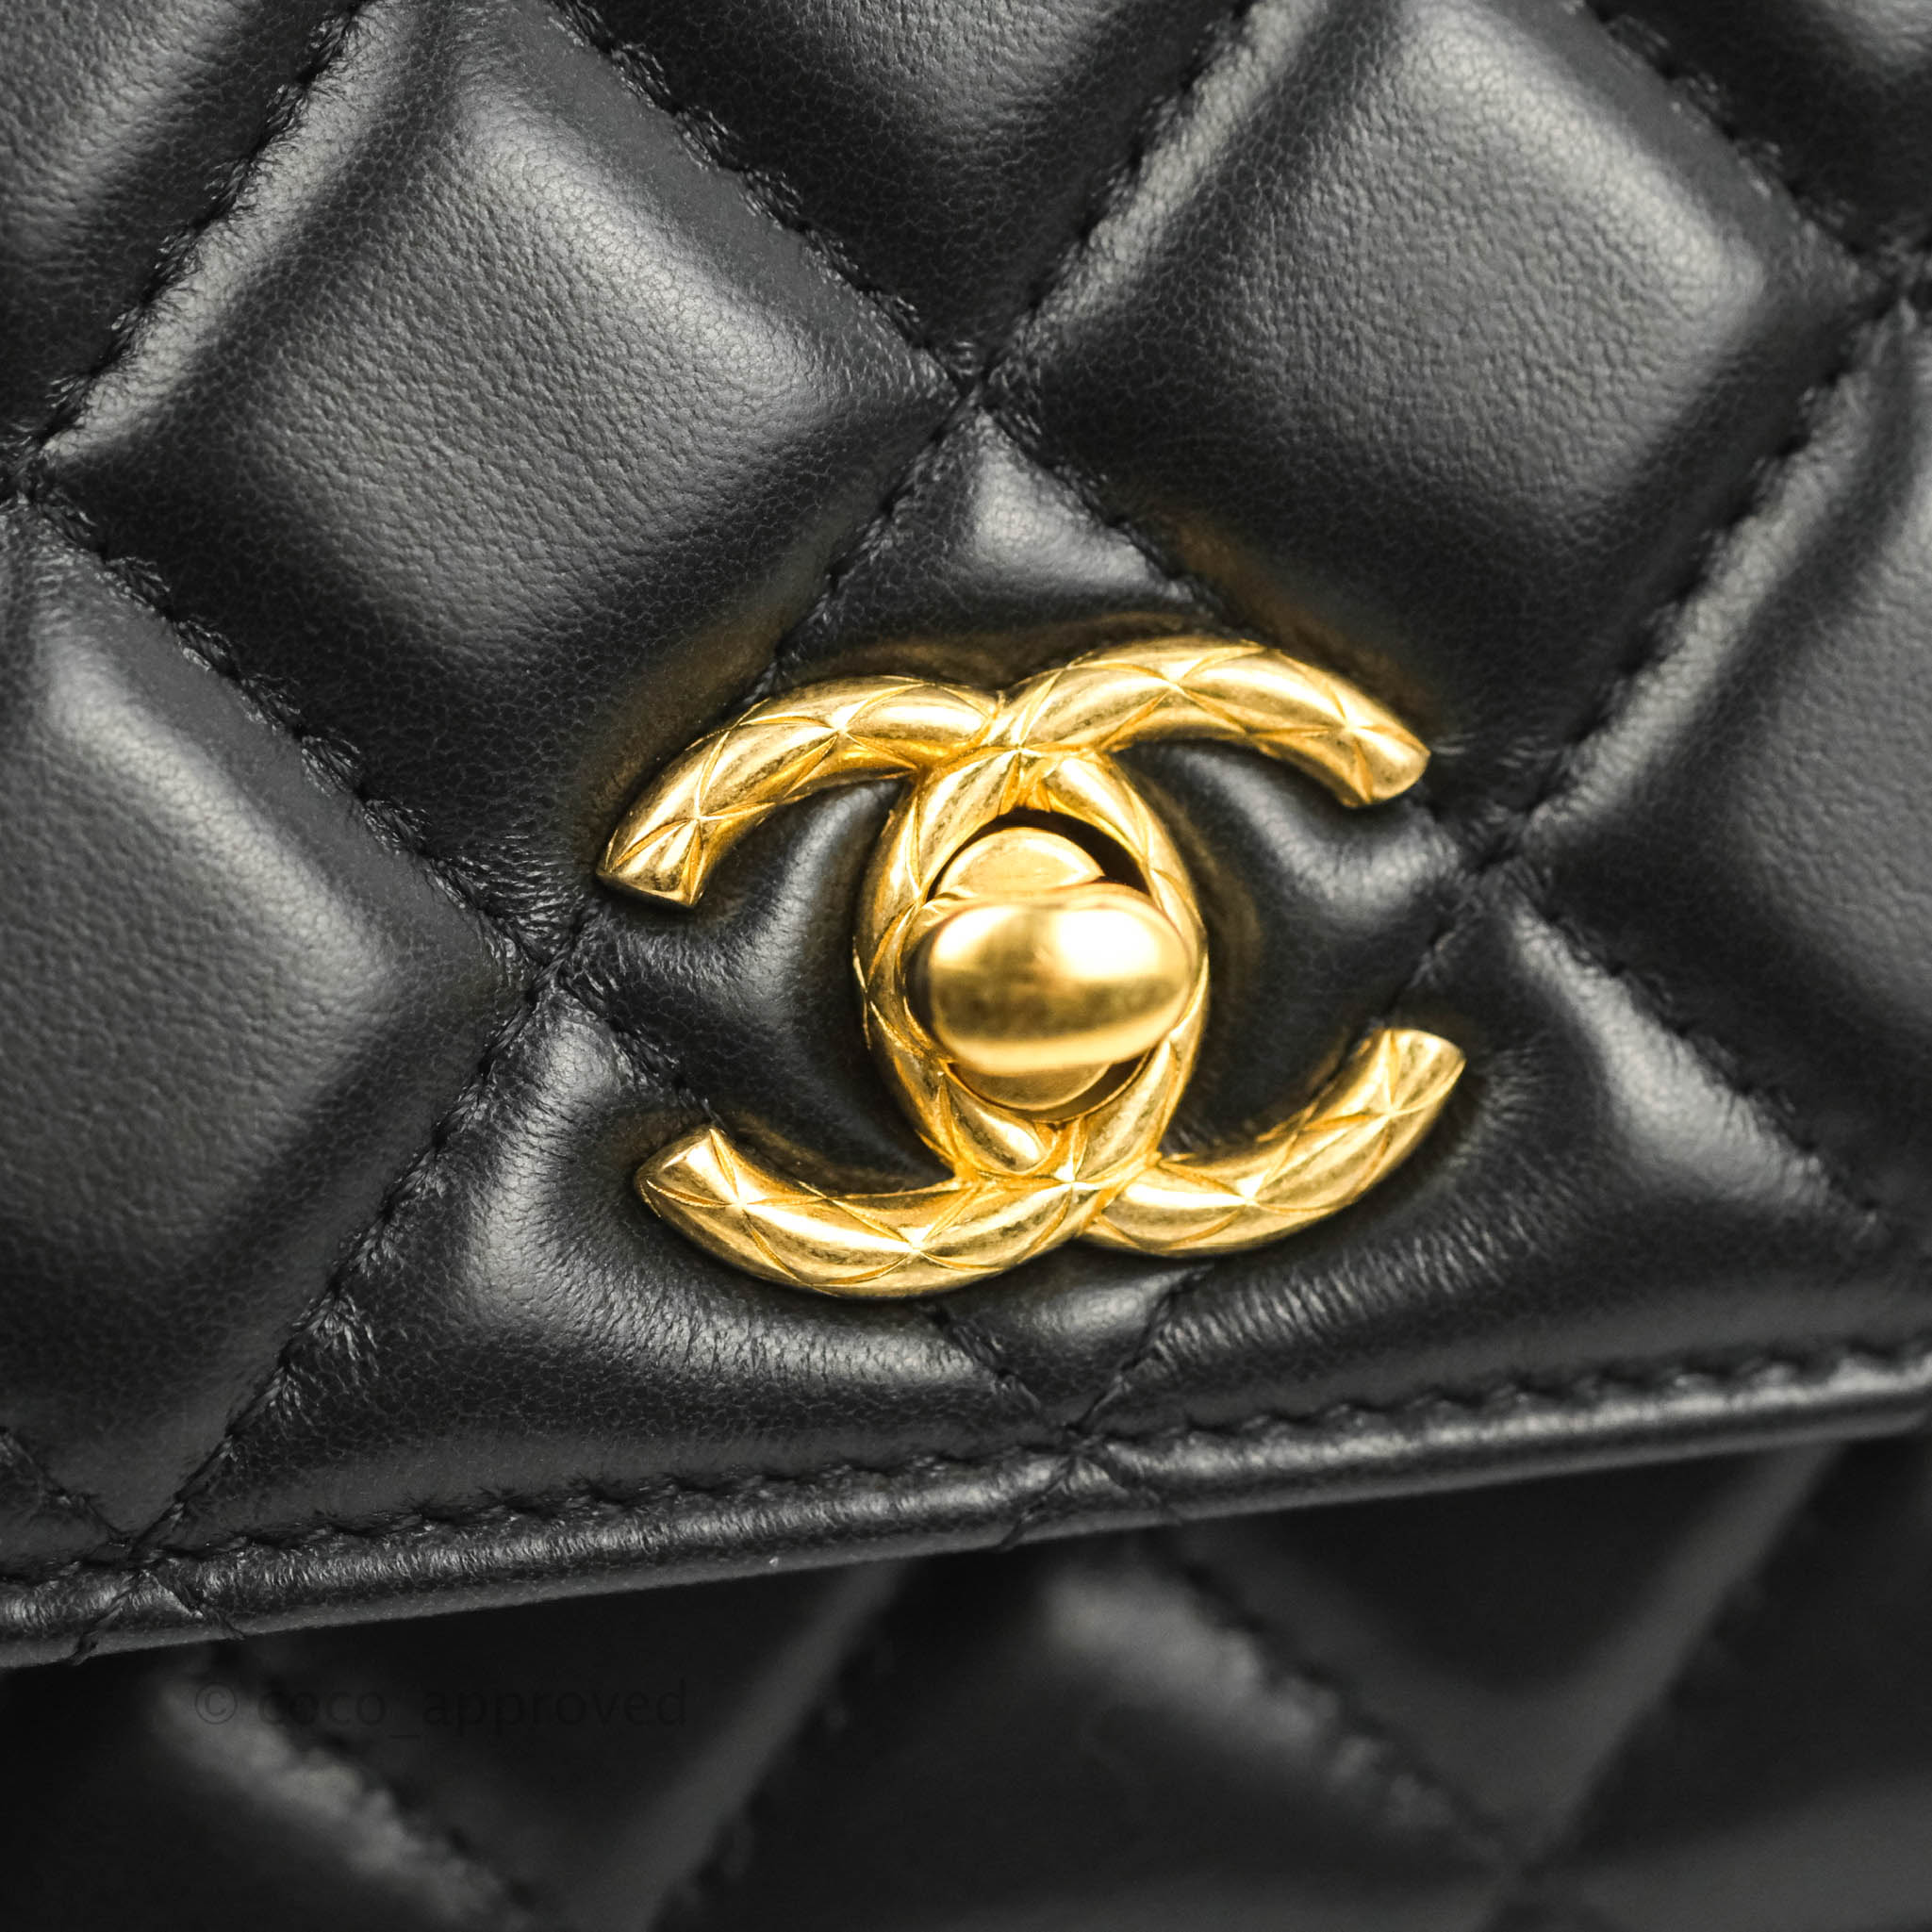 New 22K CHANEL Quilted Patent Leather Mini Small Flap Bag Gold